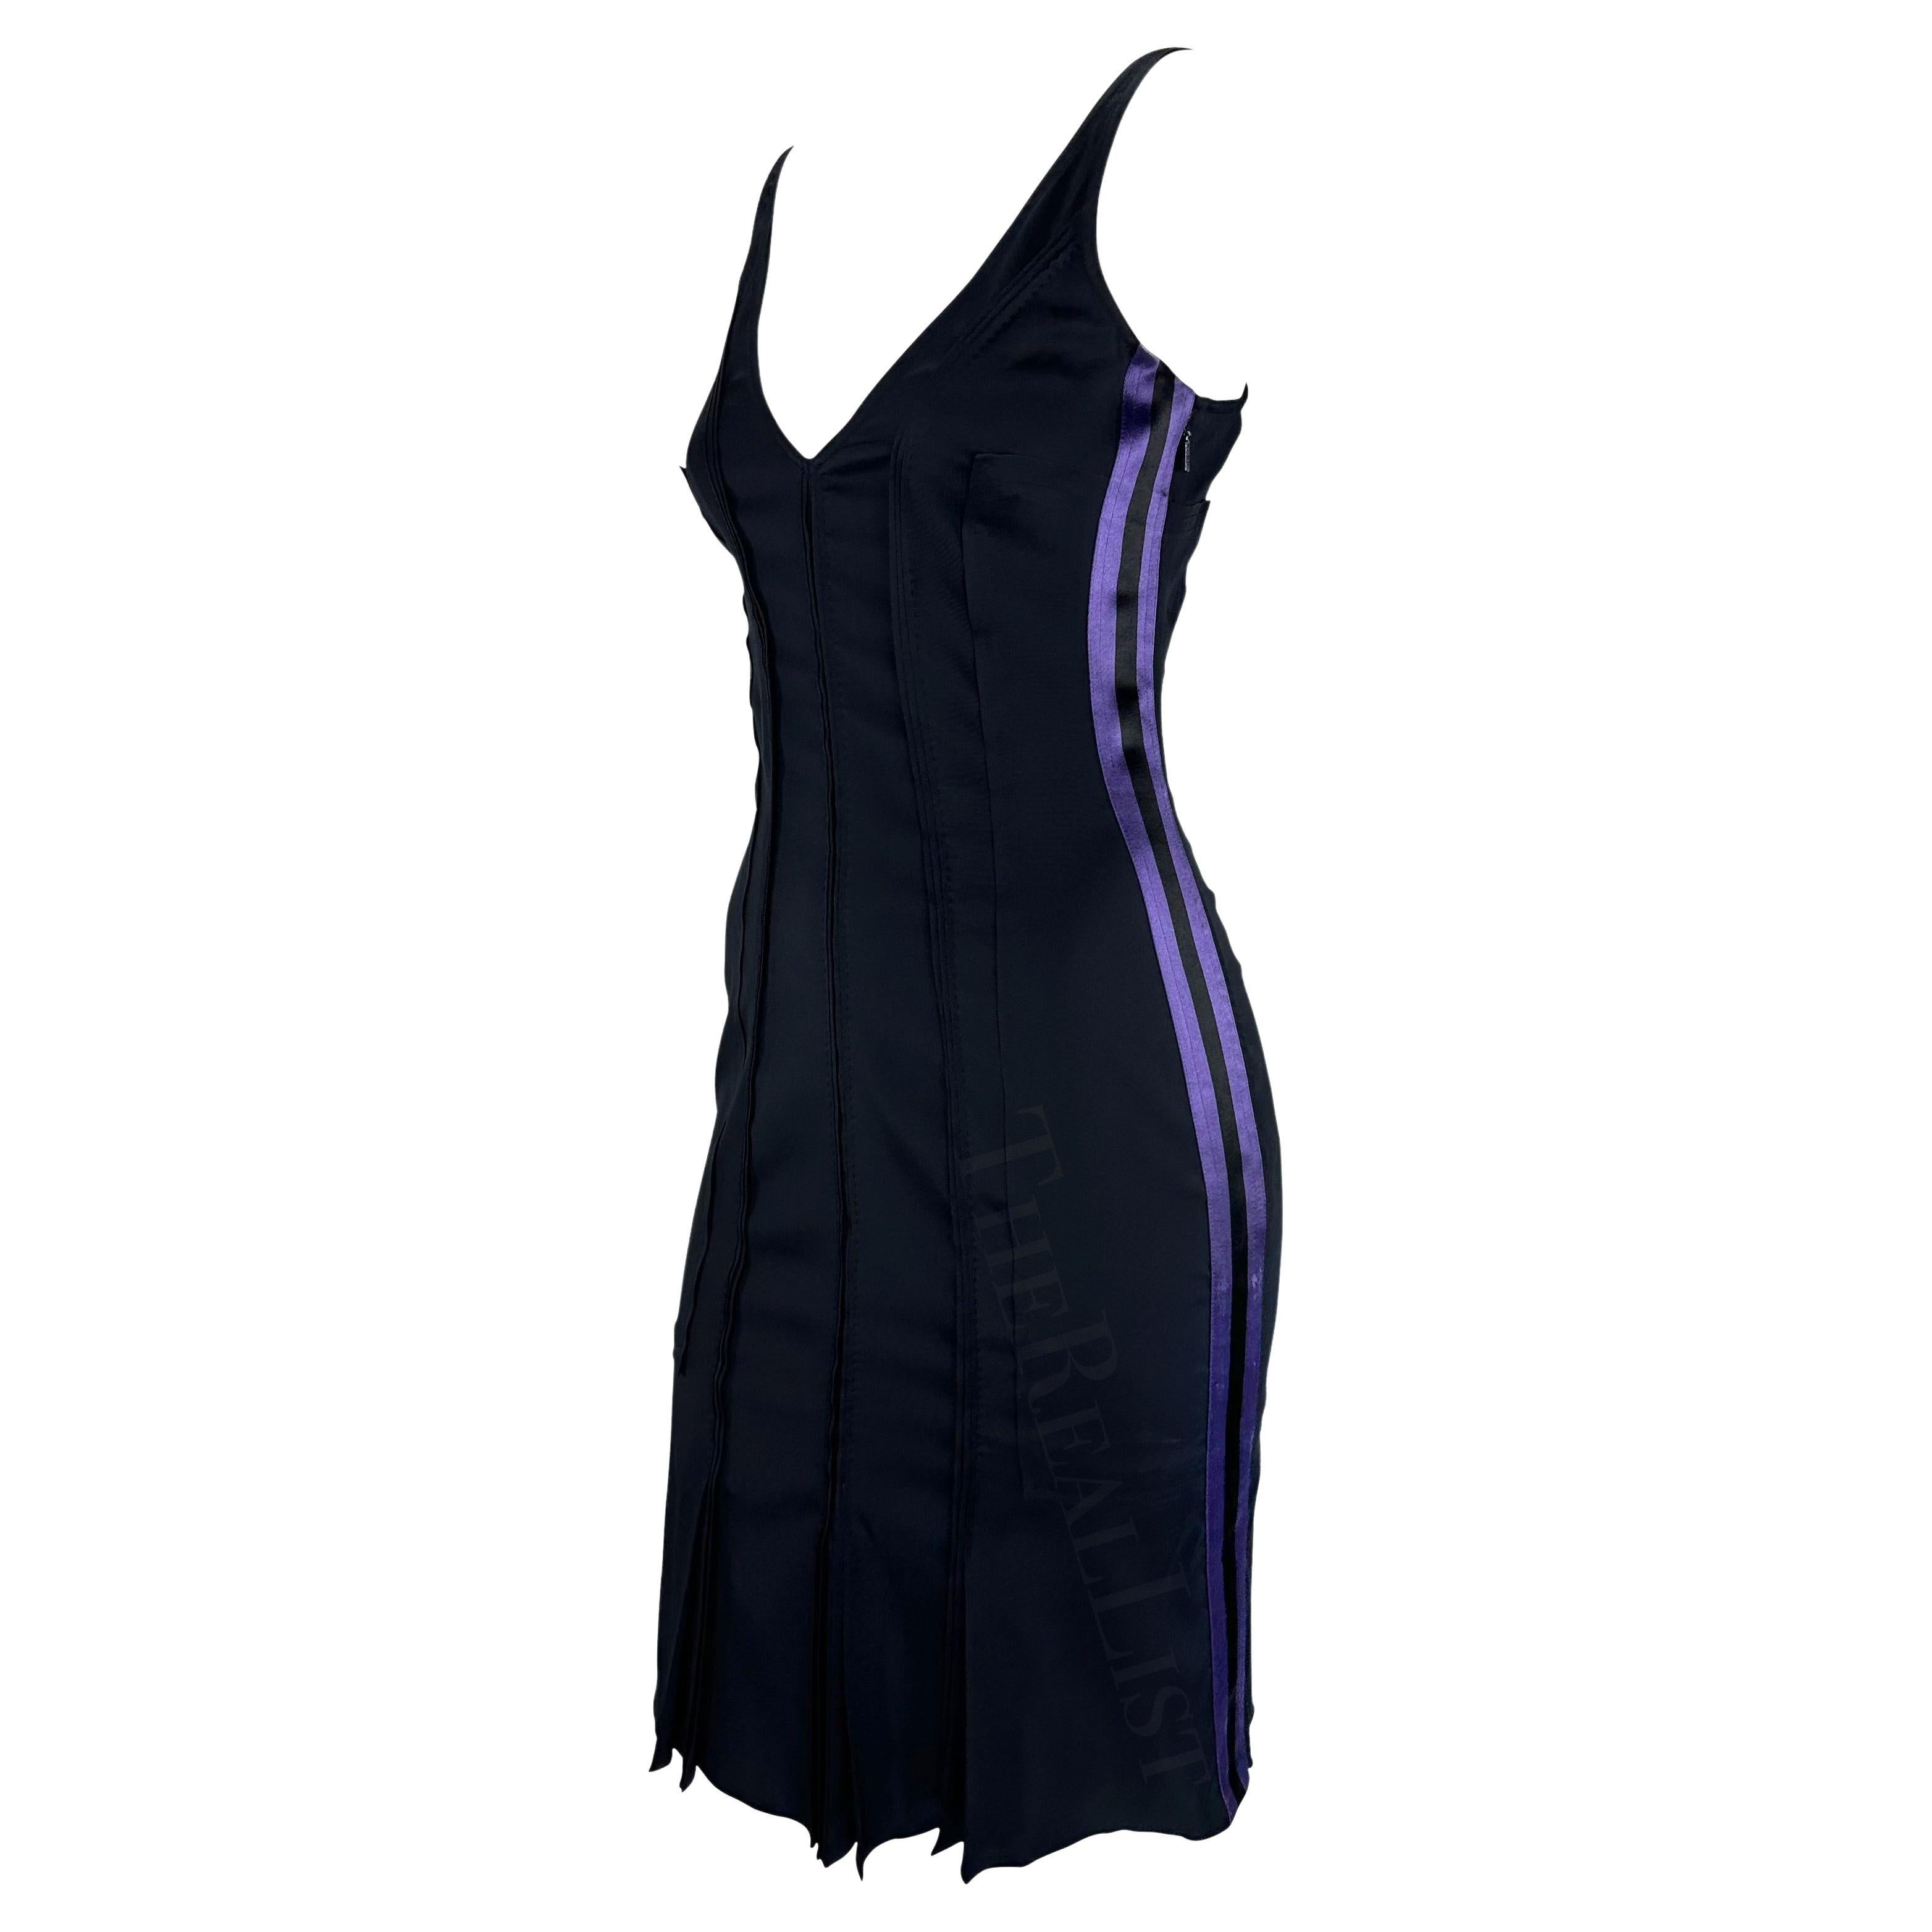 S/S 2004 Gucci by Tom Ford Black Silk Runway Dress with Purple Satin Stripe